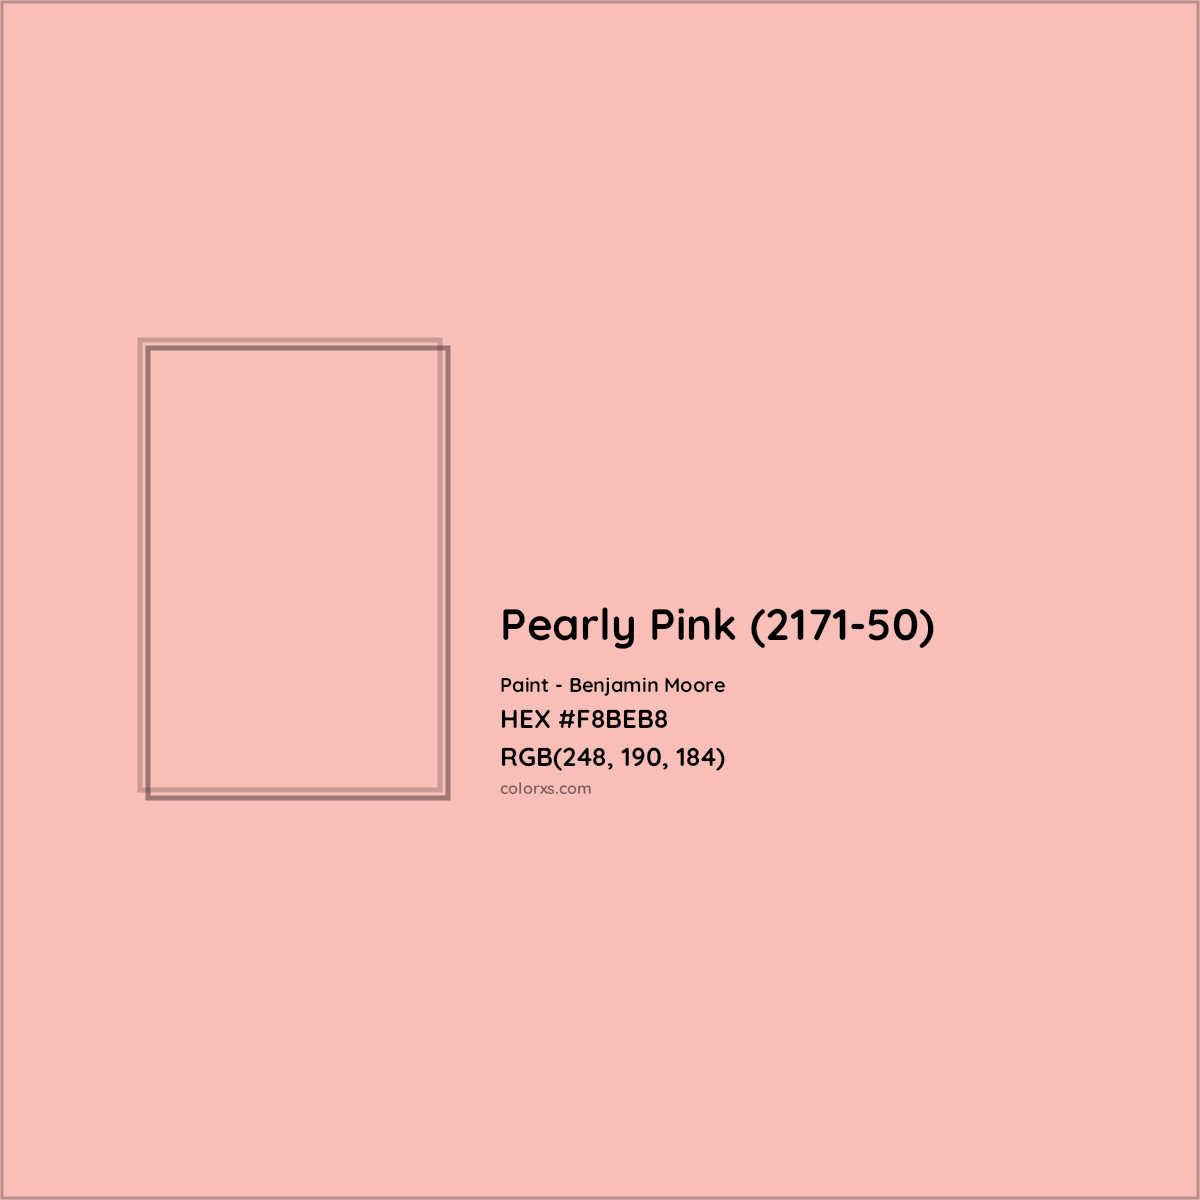 HEX #F8BEB8 Pearly Pink (2171-50) Paint Benjamin Moore - Color Code